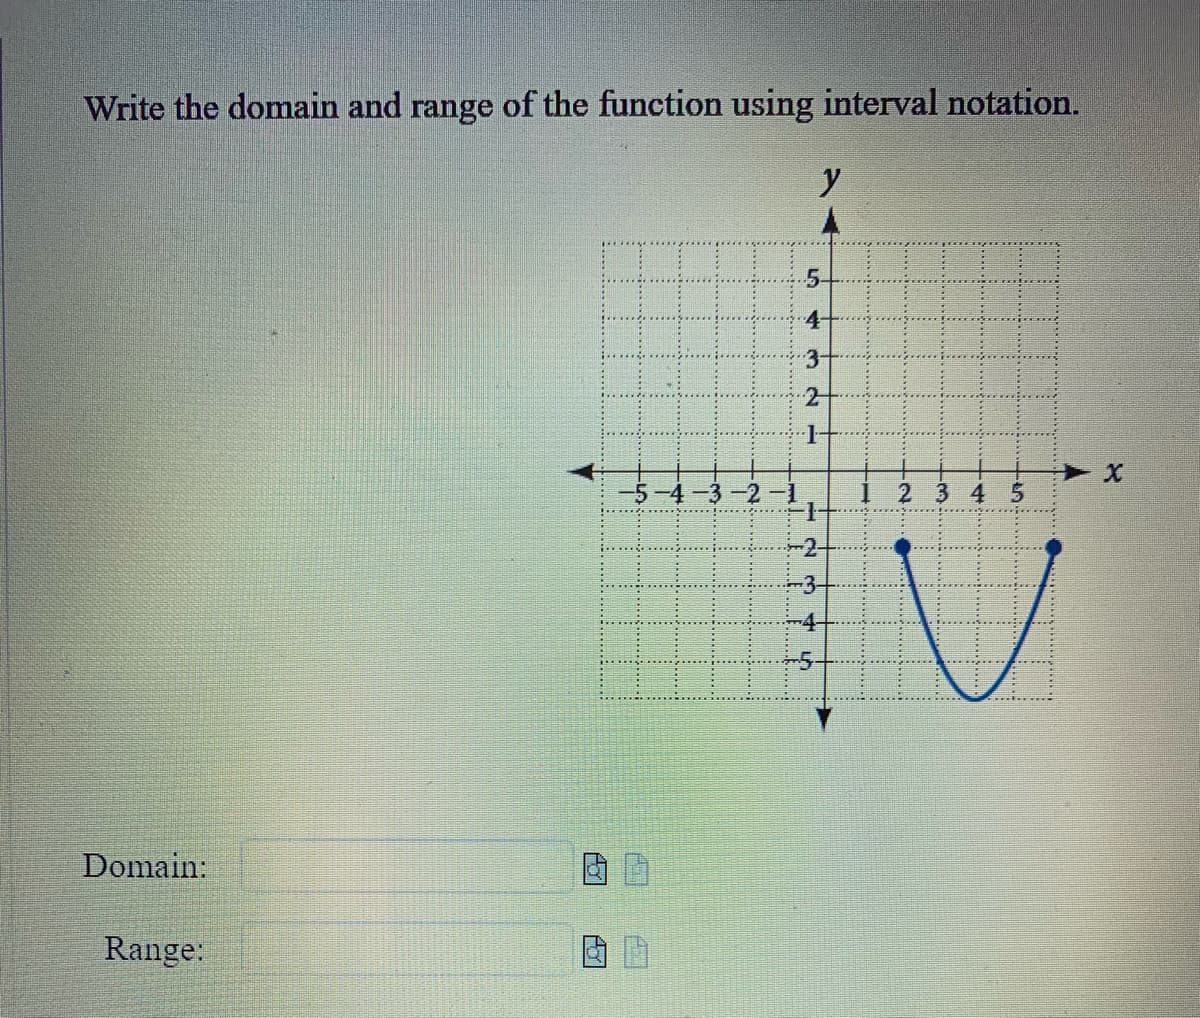 Write the domain and range of the function using interval notation.
Domain:
Range:
A
-5-4-3-2
J
5-
4-
3-
y
2
P
GN
-3-
1234
V